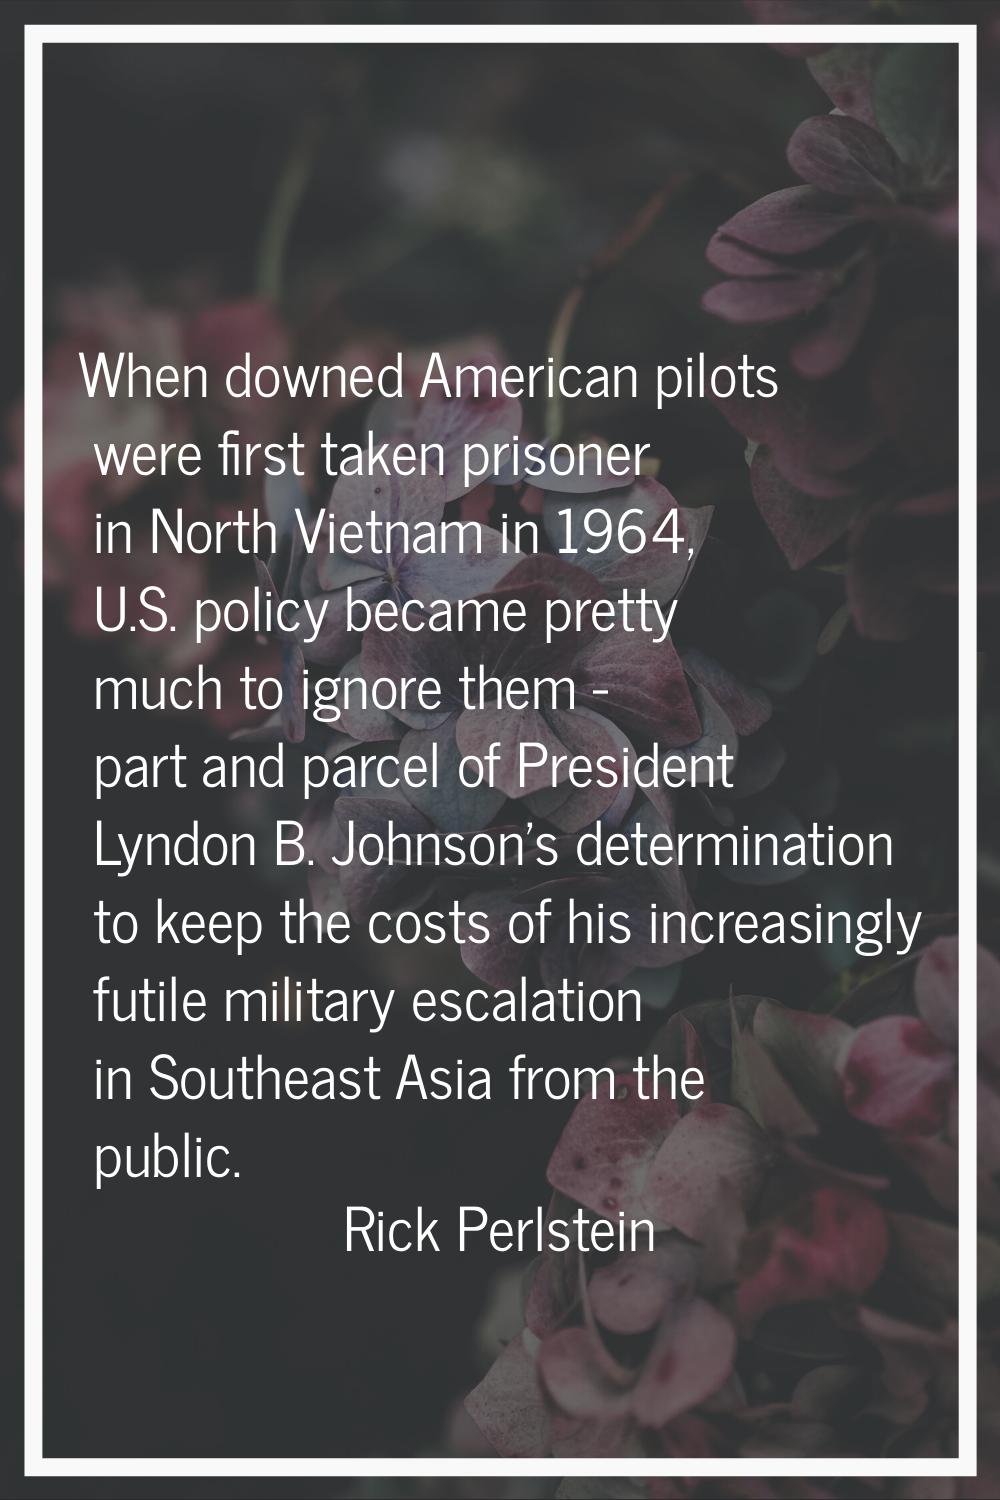 When downed American pilots were first taken prisoner in North Vietnam in 1964, U.S. policy became 